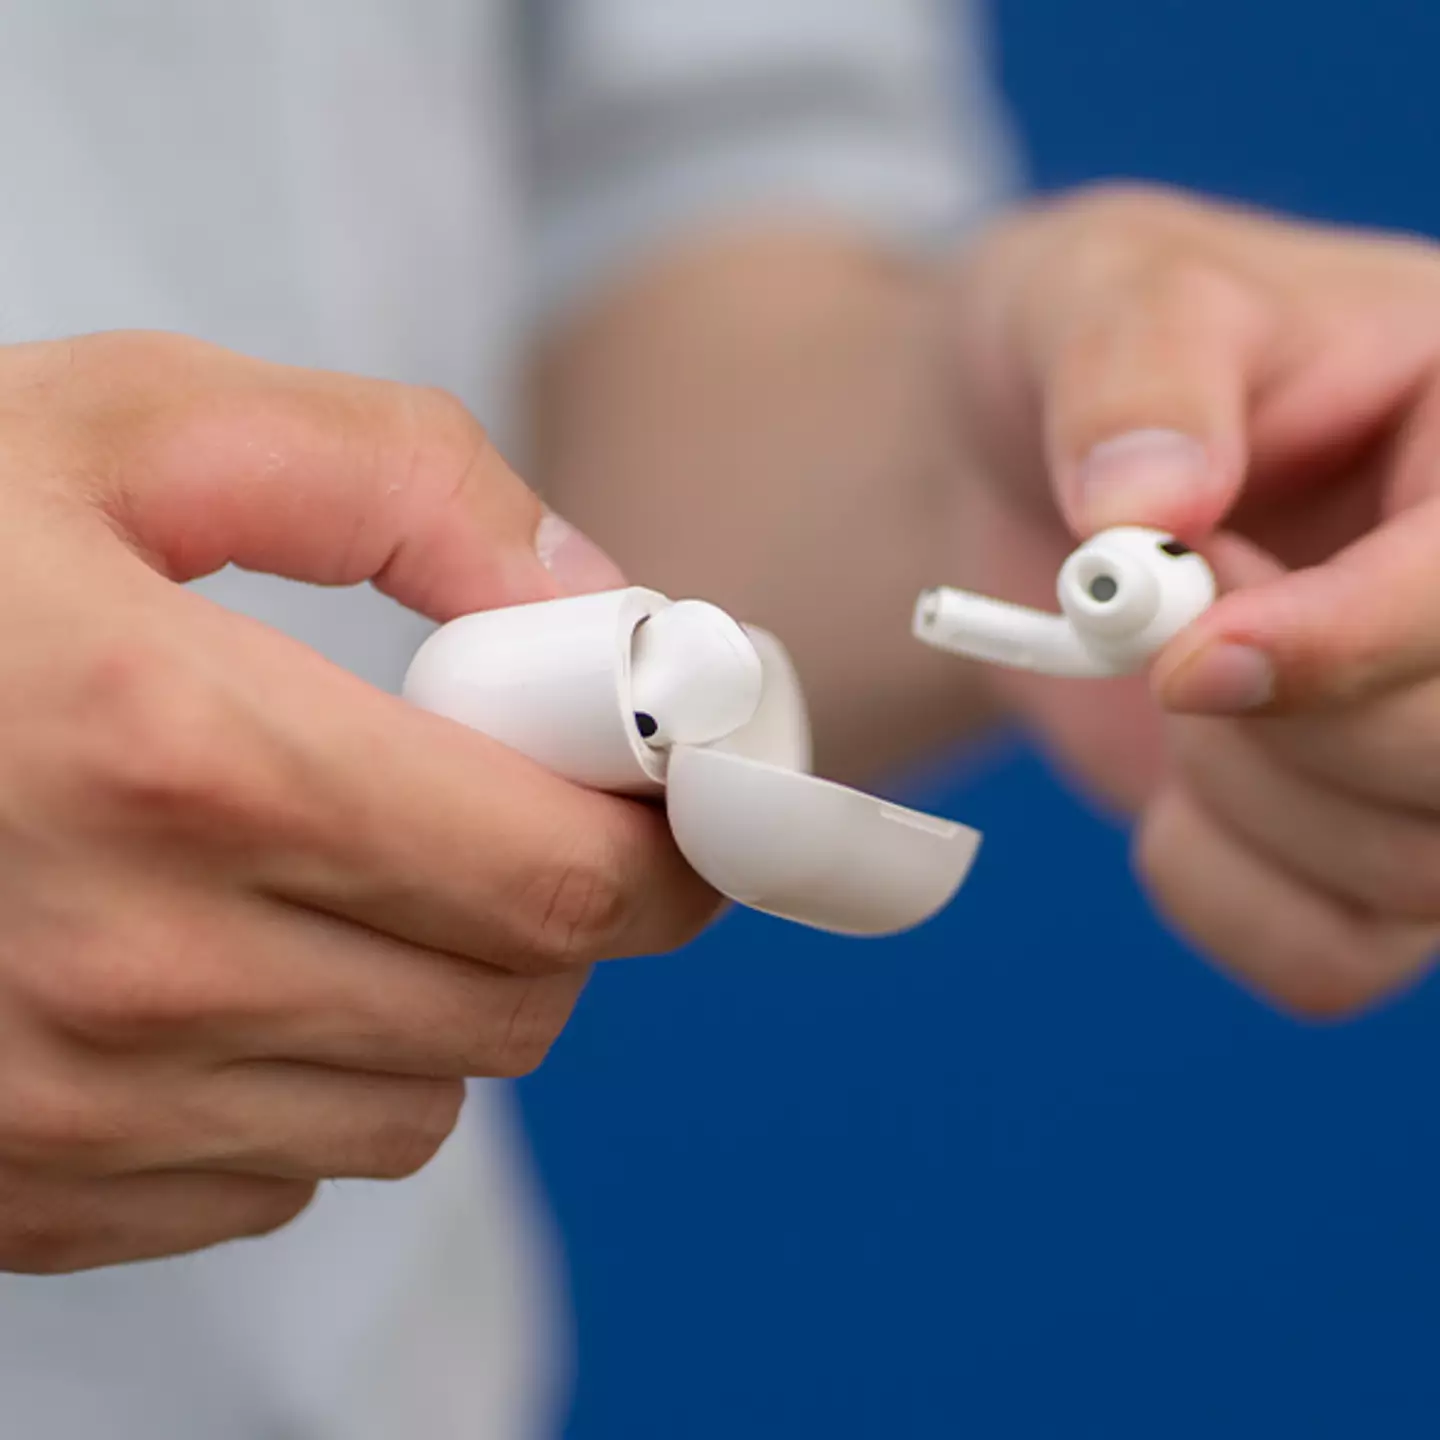 AirPods owner claims to have discovered ‘one last trick’ that doubles the battery of their earbuds